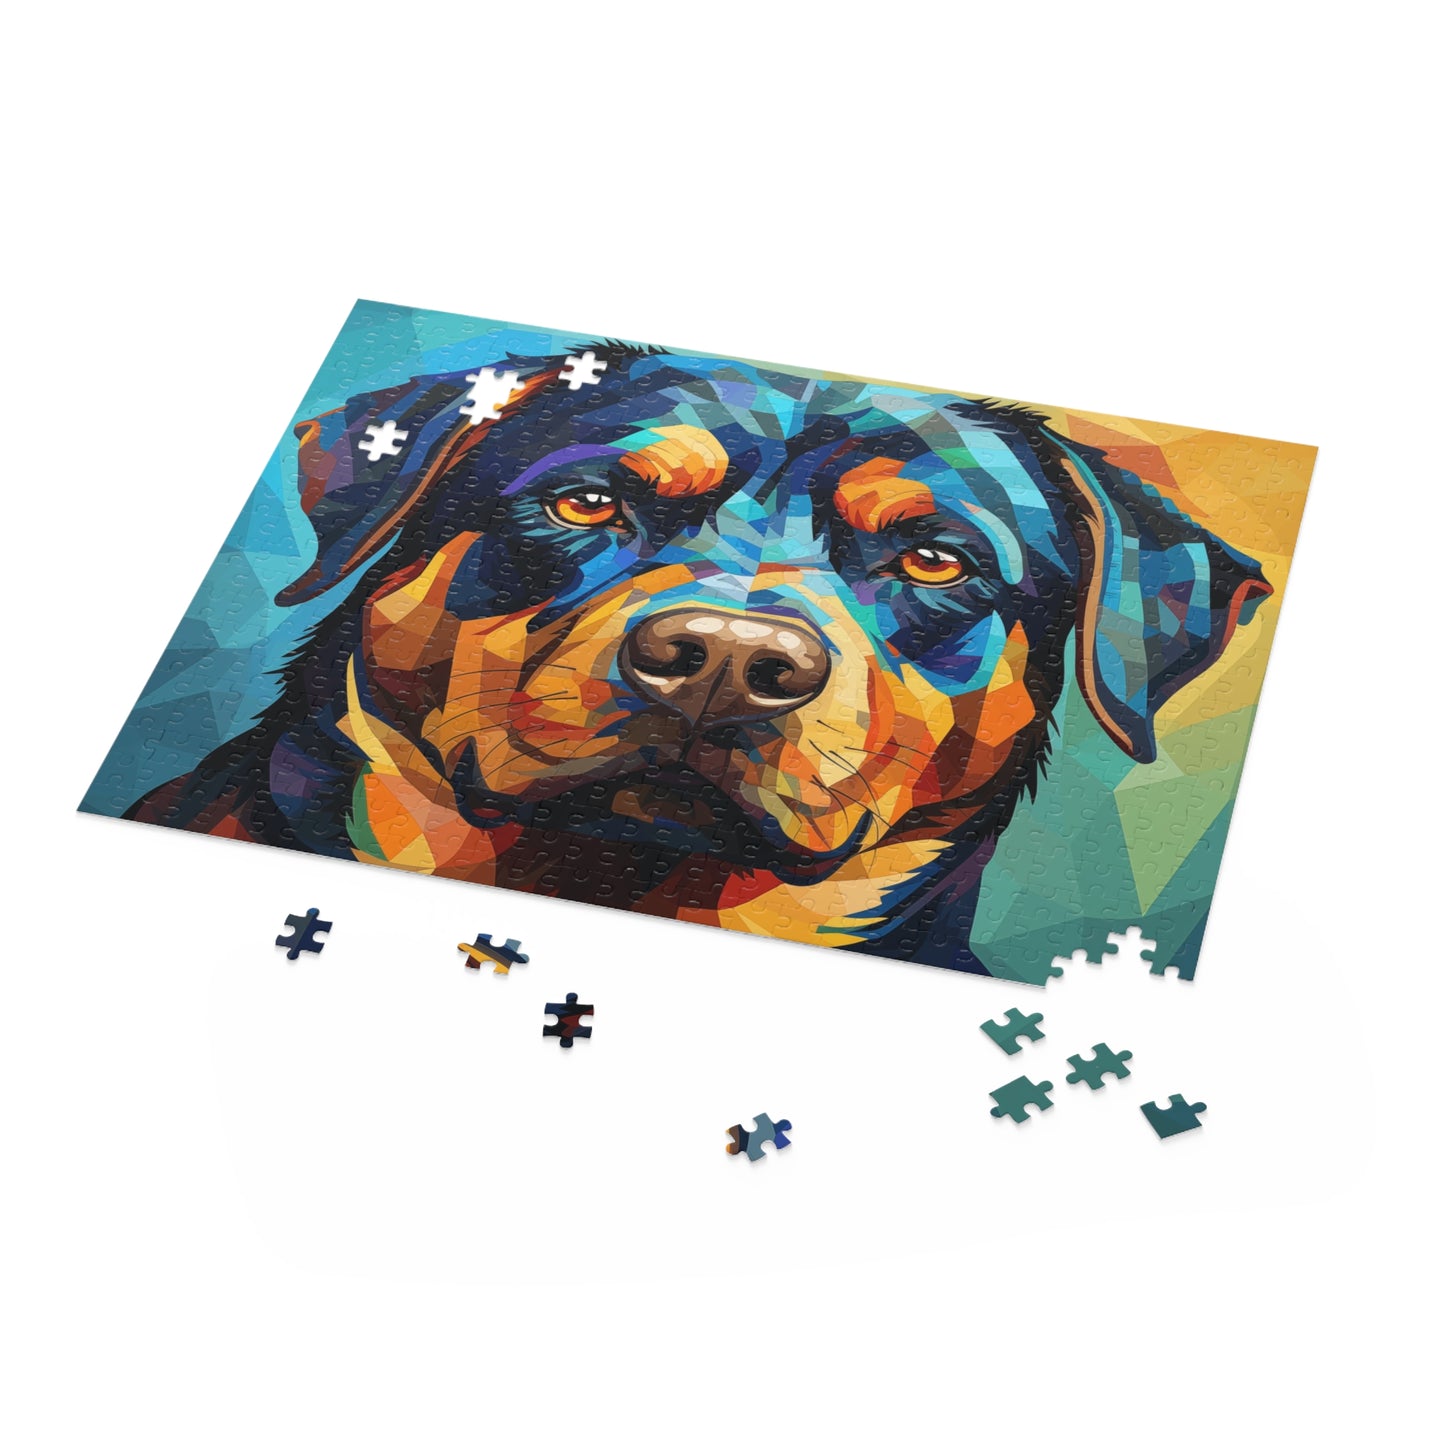 Watercolor Rottweiler Puzzle for Boys, Girls, Kids - Jigsaw Vibrant Oil Paint Dog Puzzle - Abstract Lover Gift - Rottweiler Trippy Puzzle Adult Birthday Business Jigsaw Puzzle Gift for Him Funny Humorous Indoor Outdoor Game Gift For Her Online-5